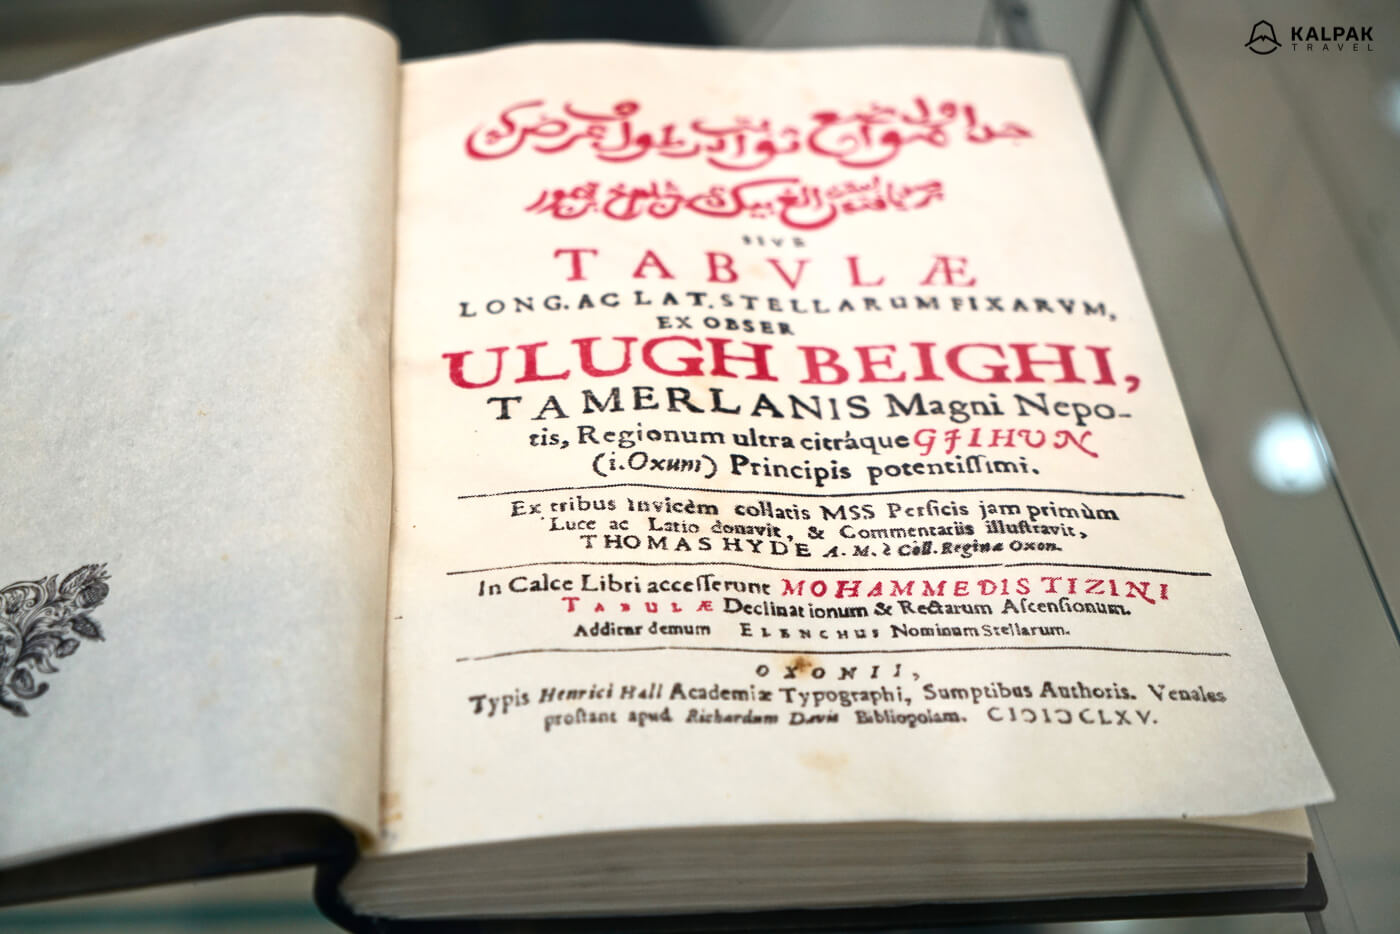 Ulughbek's book in his observatory museum